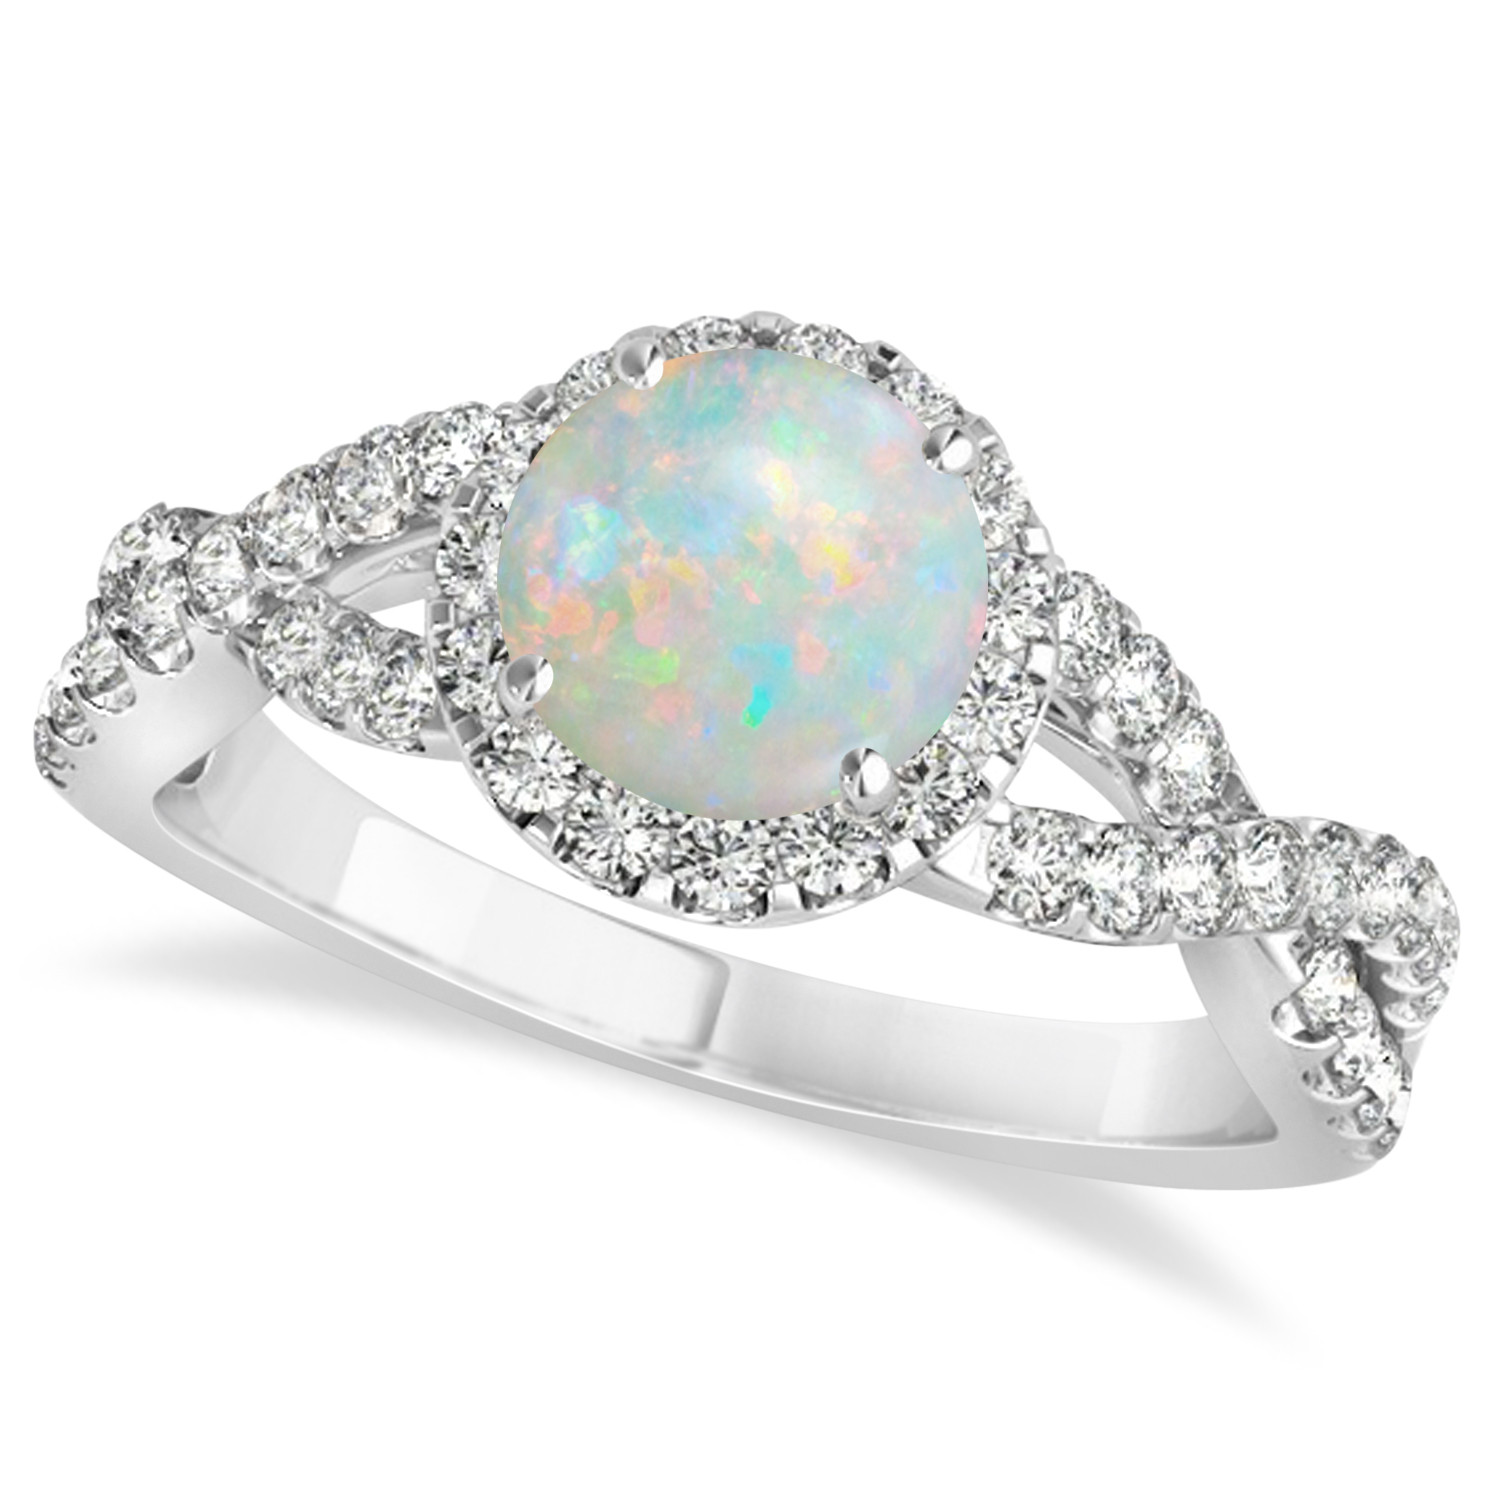 Opal And Diamond Engagement Ring
 Opal & Diamond Twisted Engagement Ring 14k White Gold 1